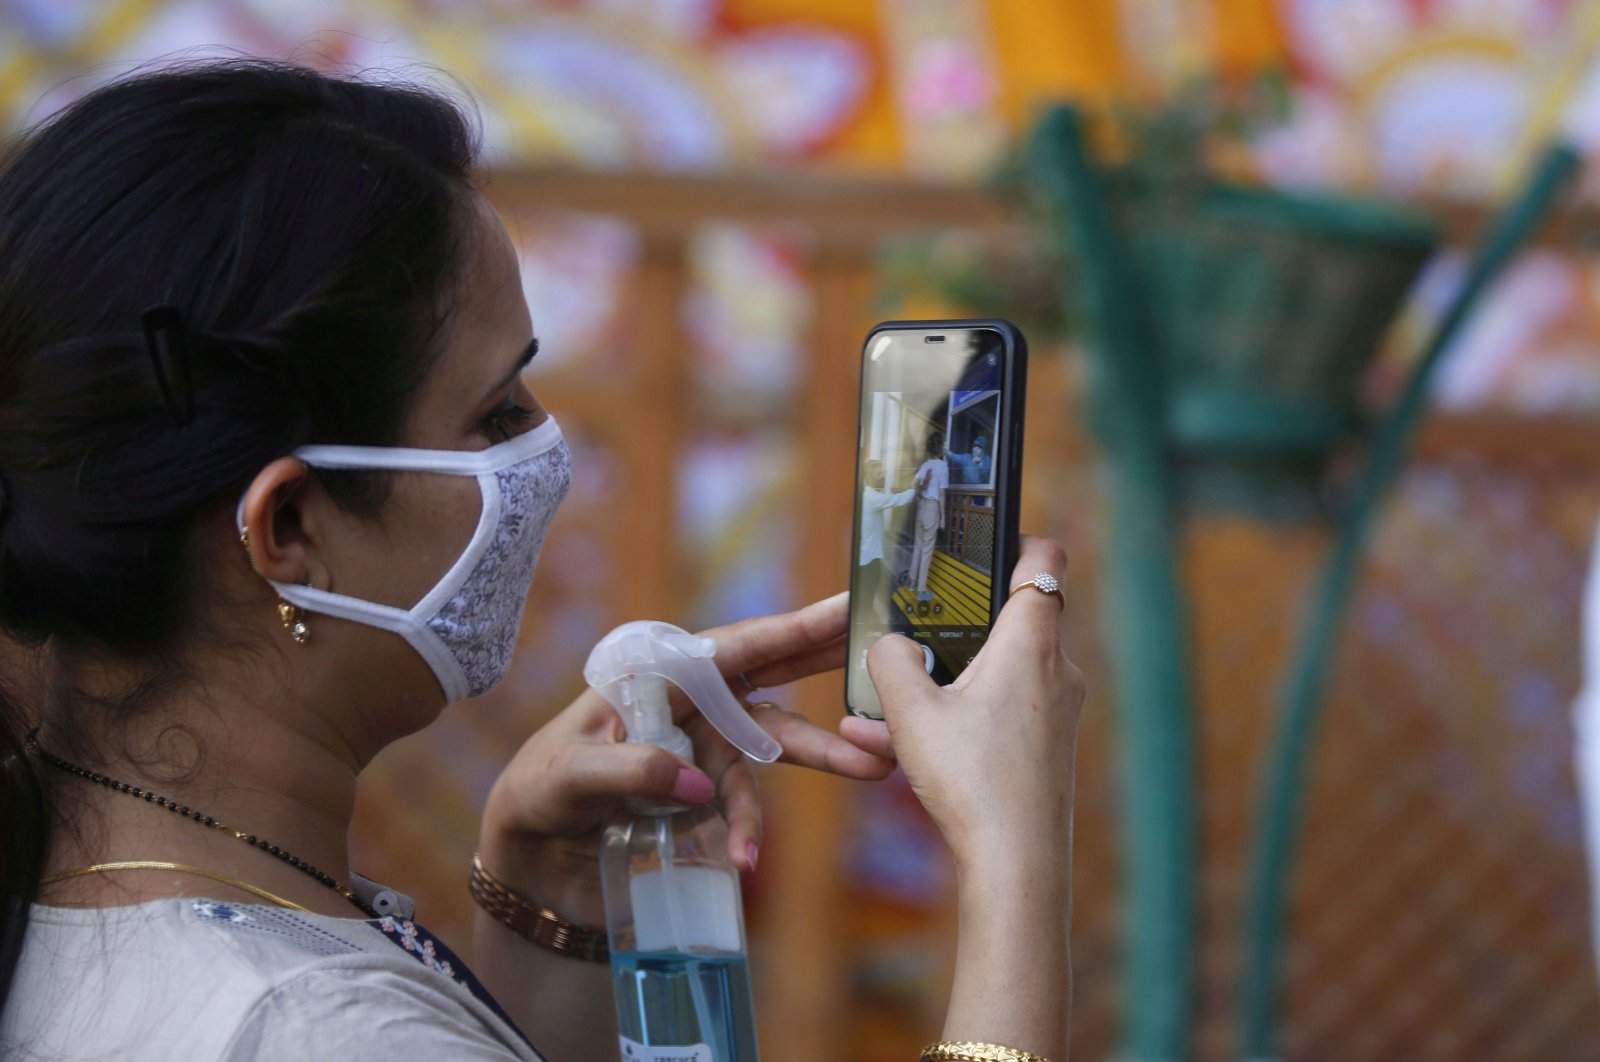 A woman takes a photograph with a cell phone as a paramedic conducts a rapid antigen test in Srinagar, the summer capital of Indian Kashmir, Aug. 10, 2020. (EPA Photo)